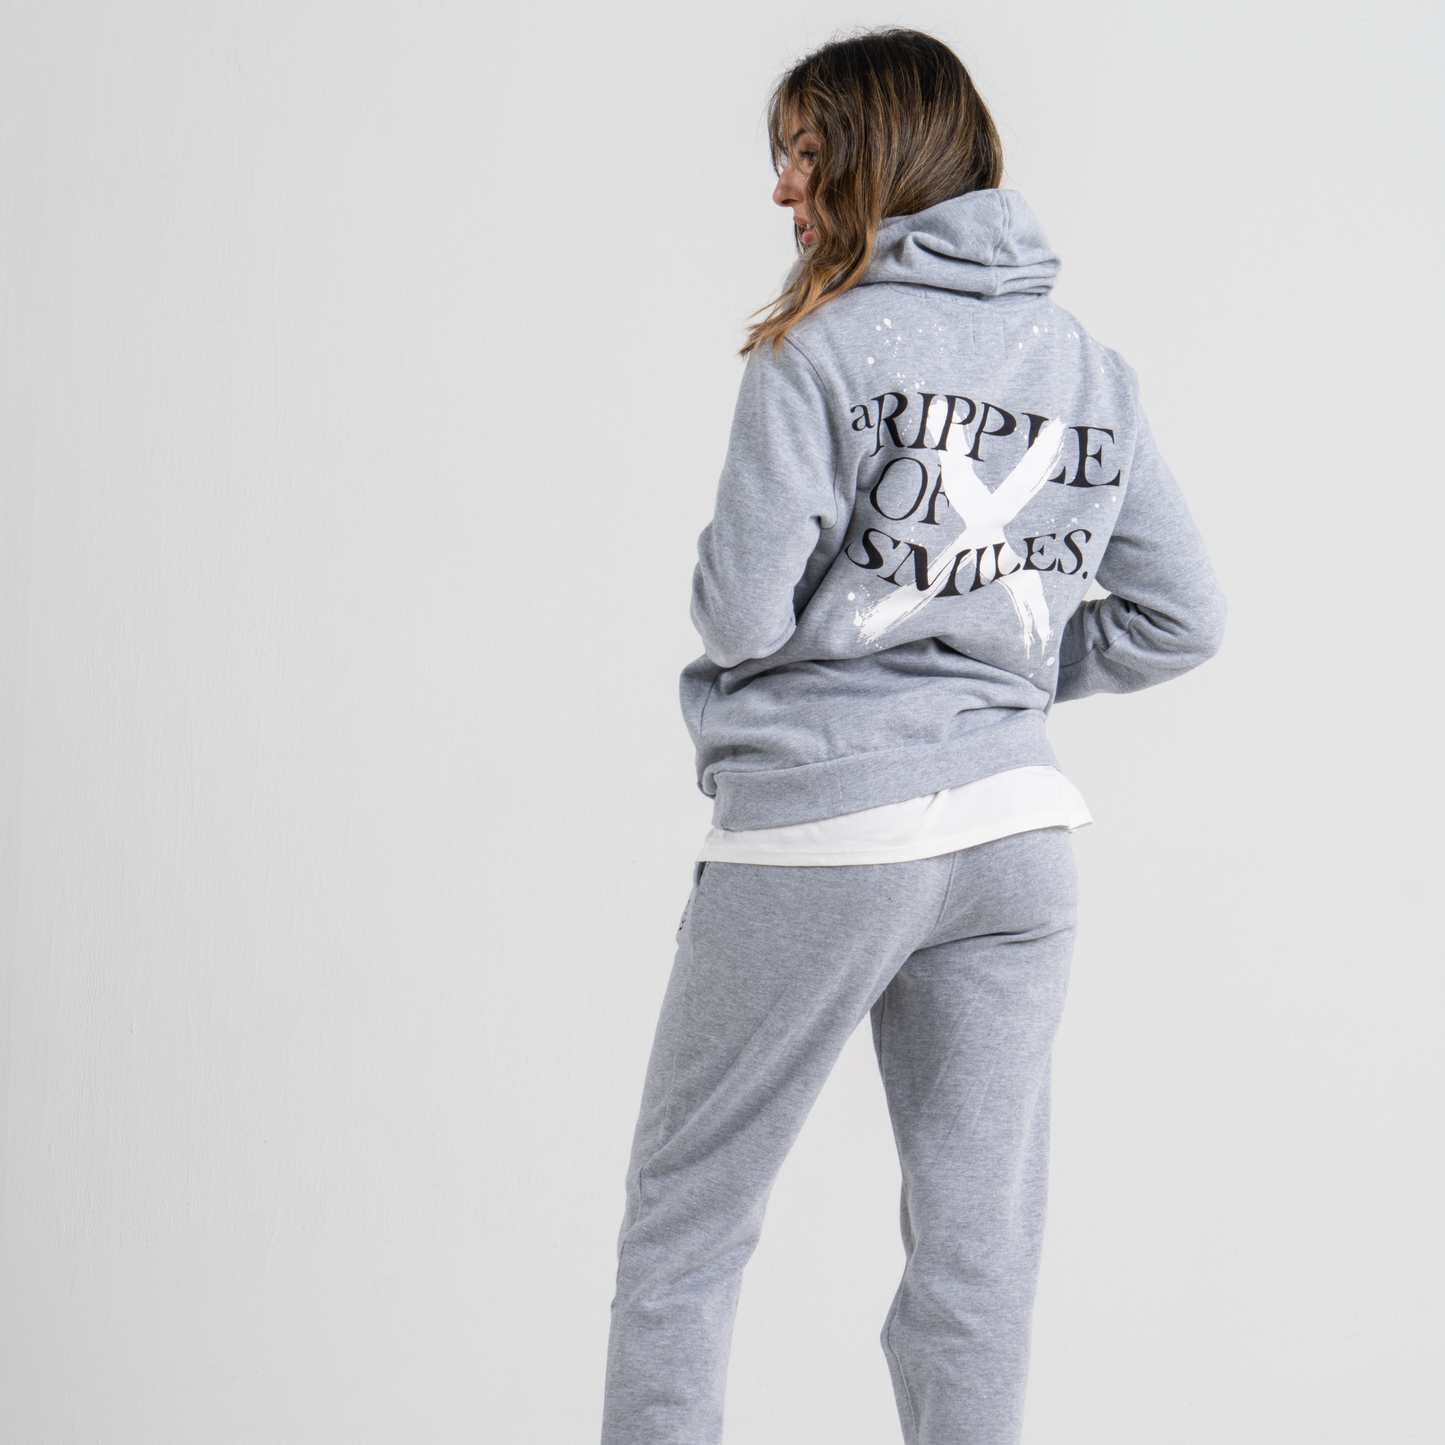 Woman back wearing grey hoodie SU1 clothing brand and grey sport trousers